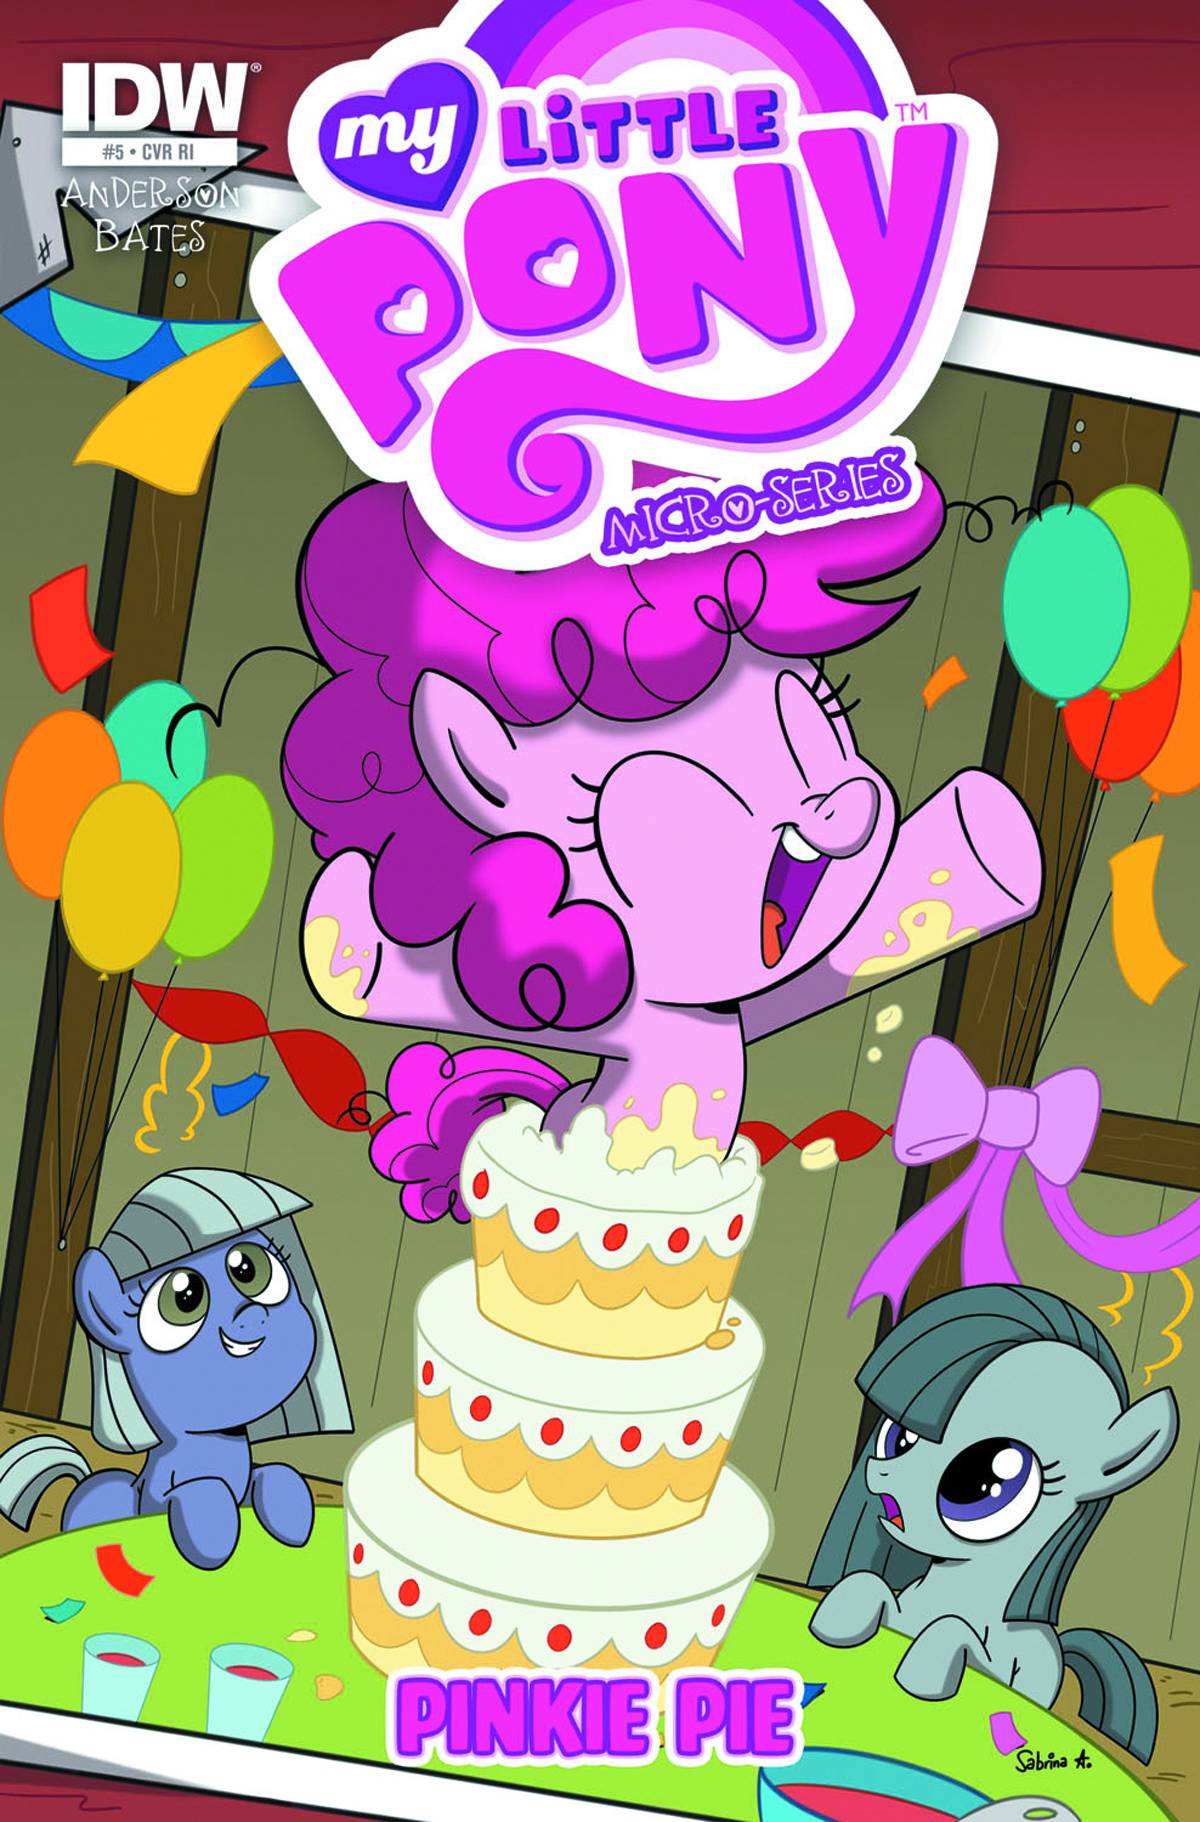 My Little Pony Micro Series #5 Free 1 for 10 Incentive